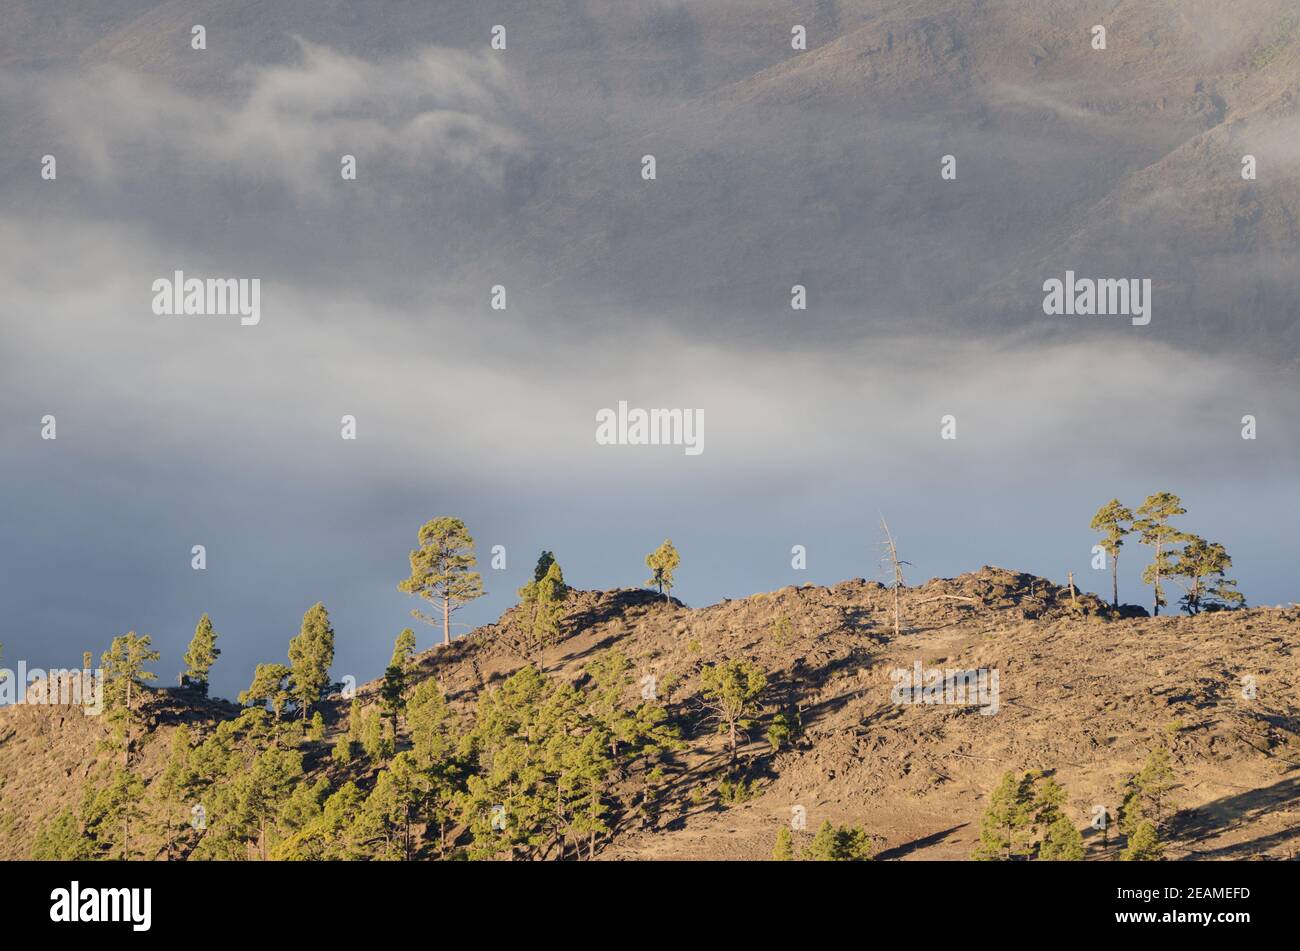 Landscape in the Integral Natural Reserve of Inagua. Stock Photo